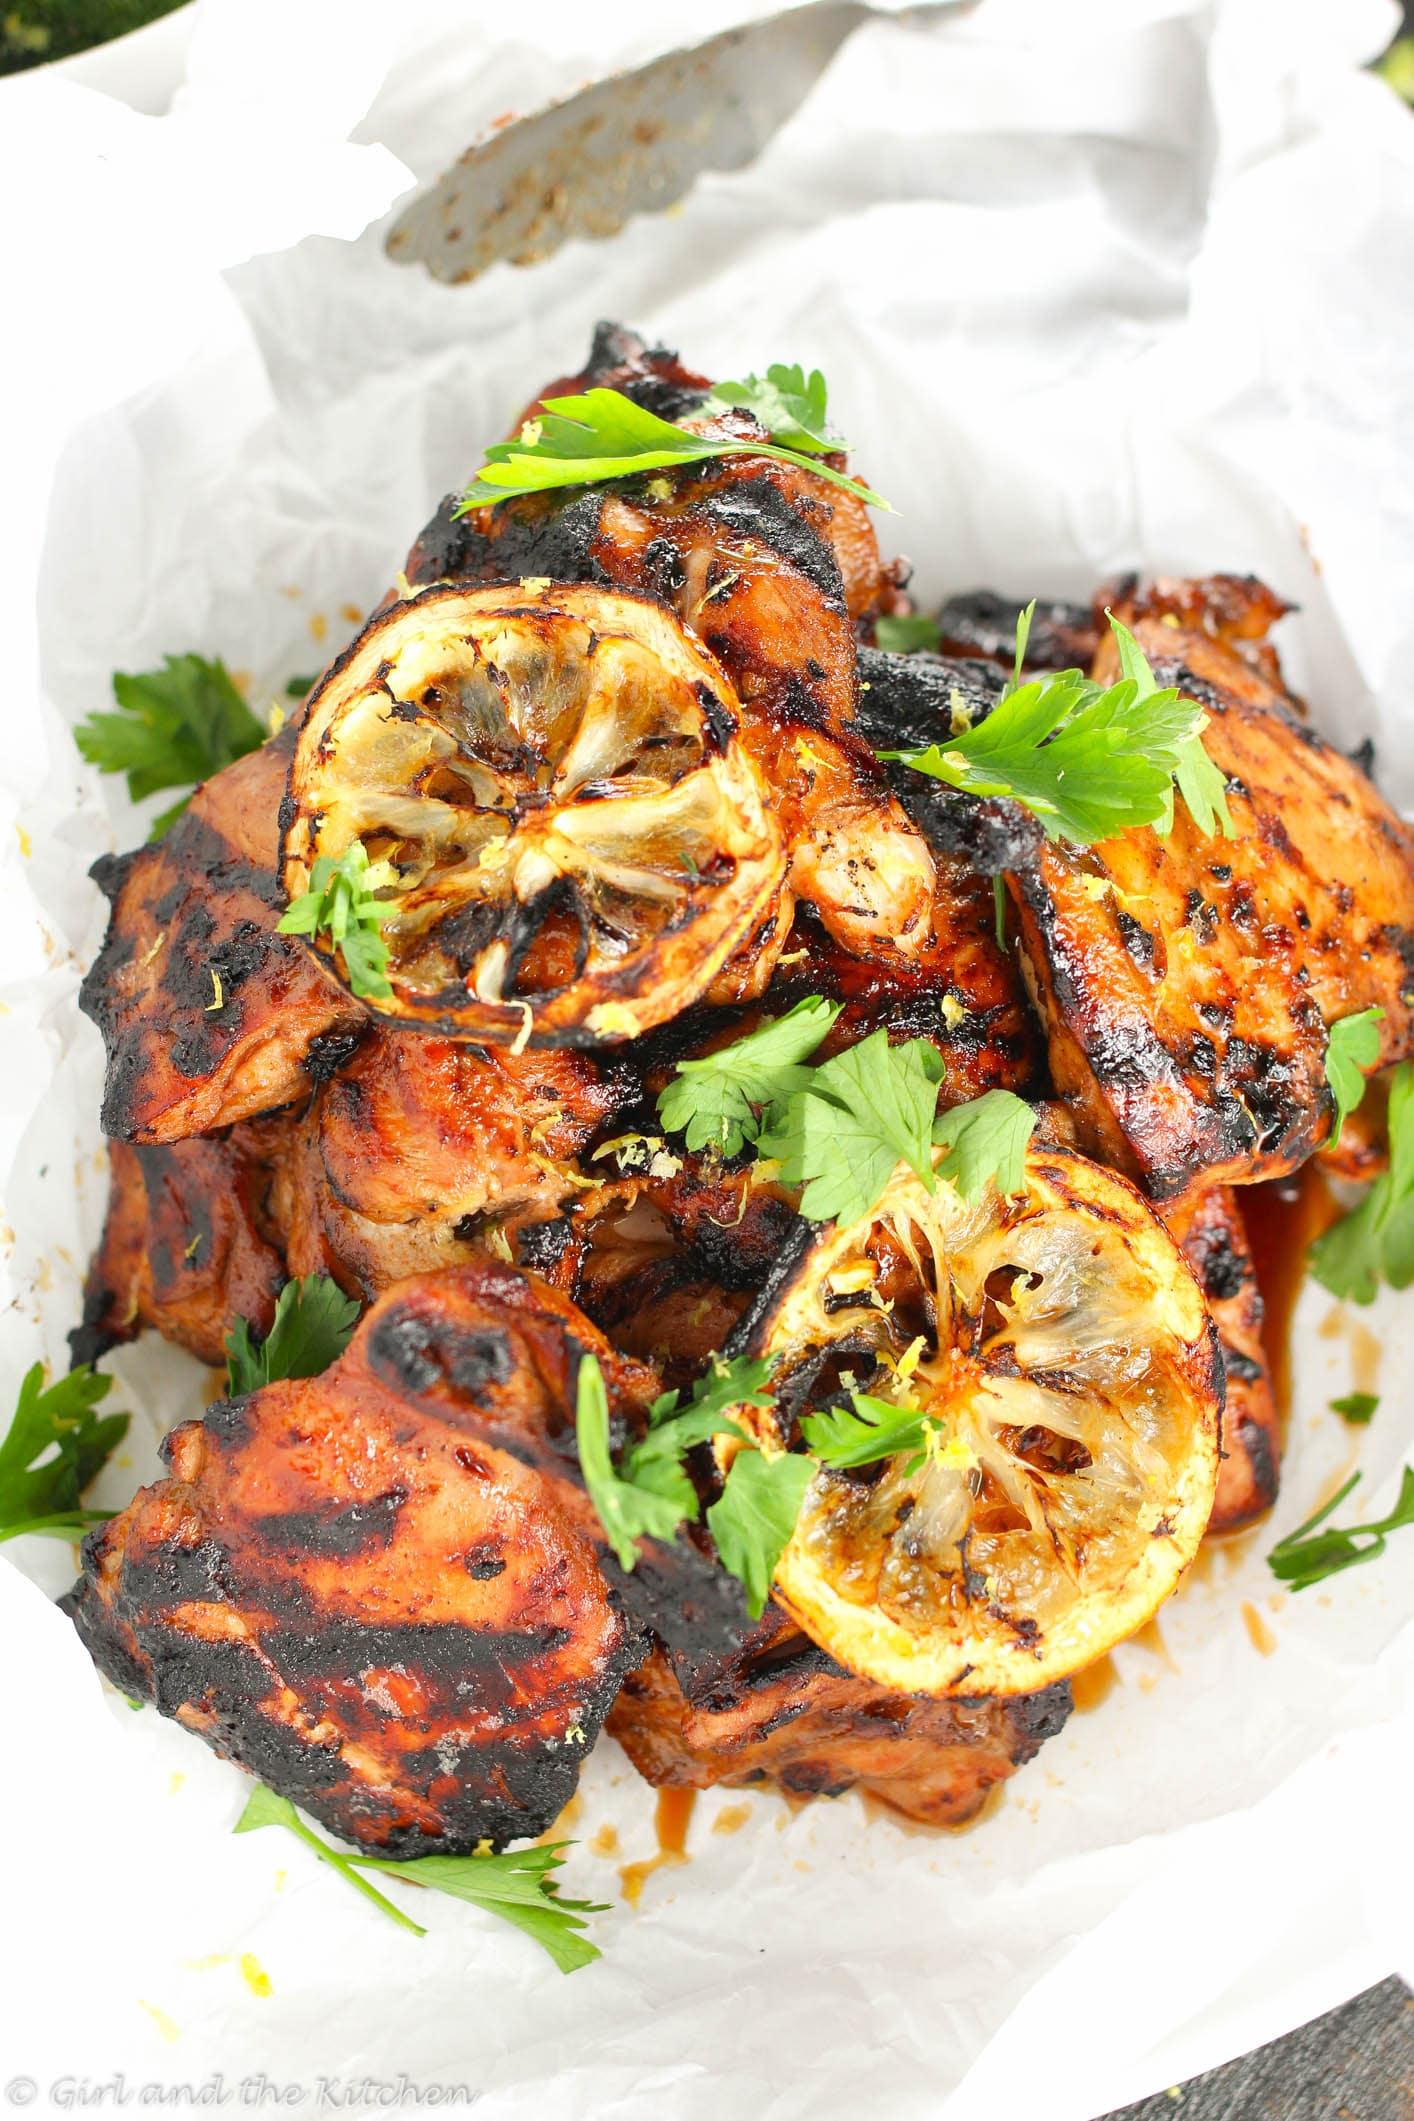 An incredibly easy and uber flavorful grilled chicken recipe full of tangy and smoky flavors all made with an extremely versatile rub!